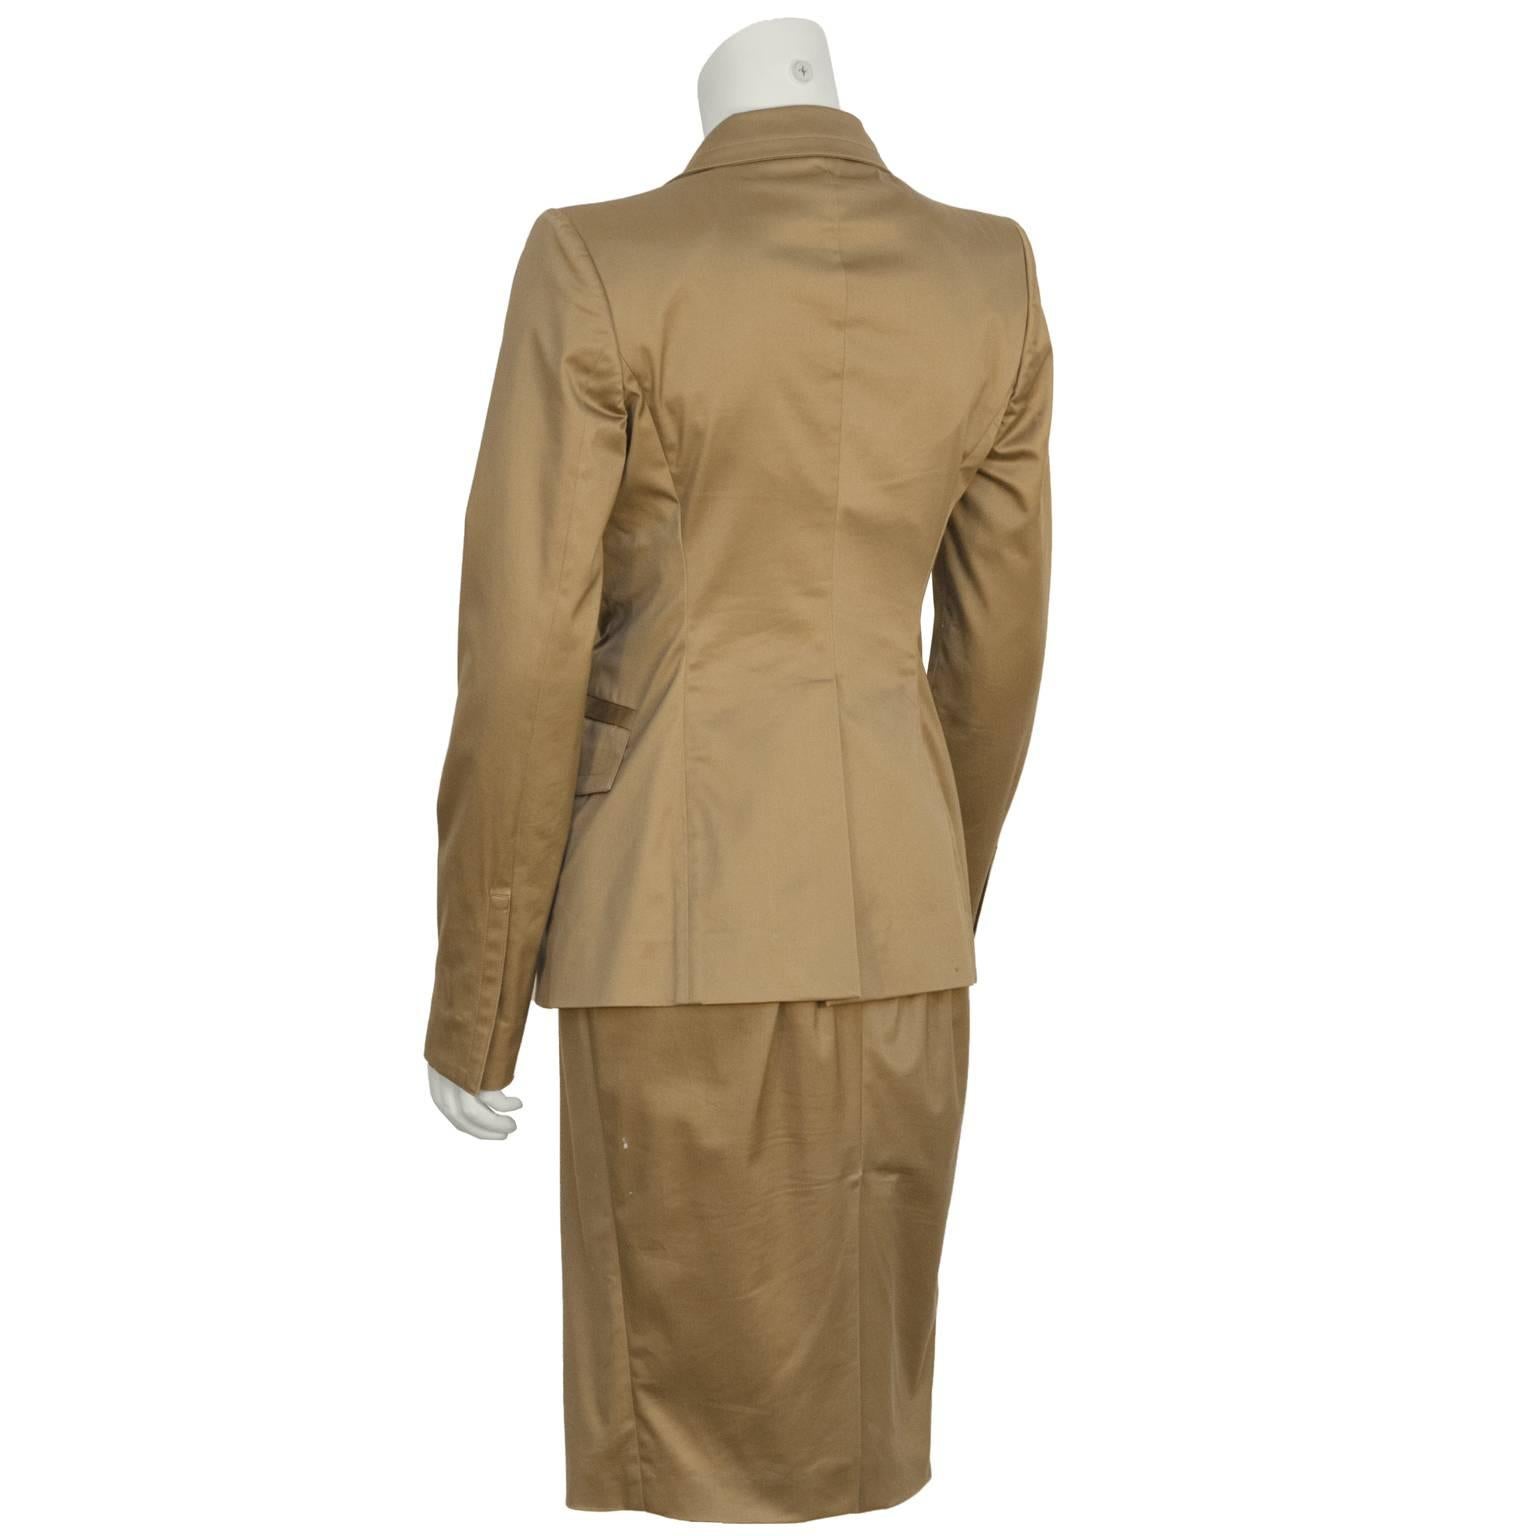 2003 Gucci by Tom Ford Khaki Dress and Jacket Set 1